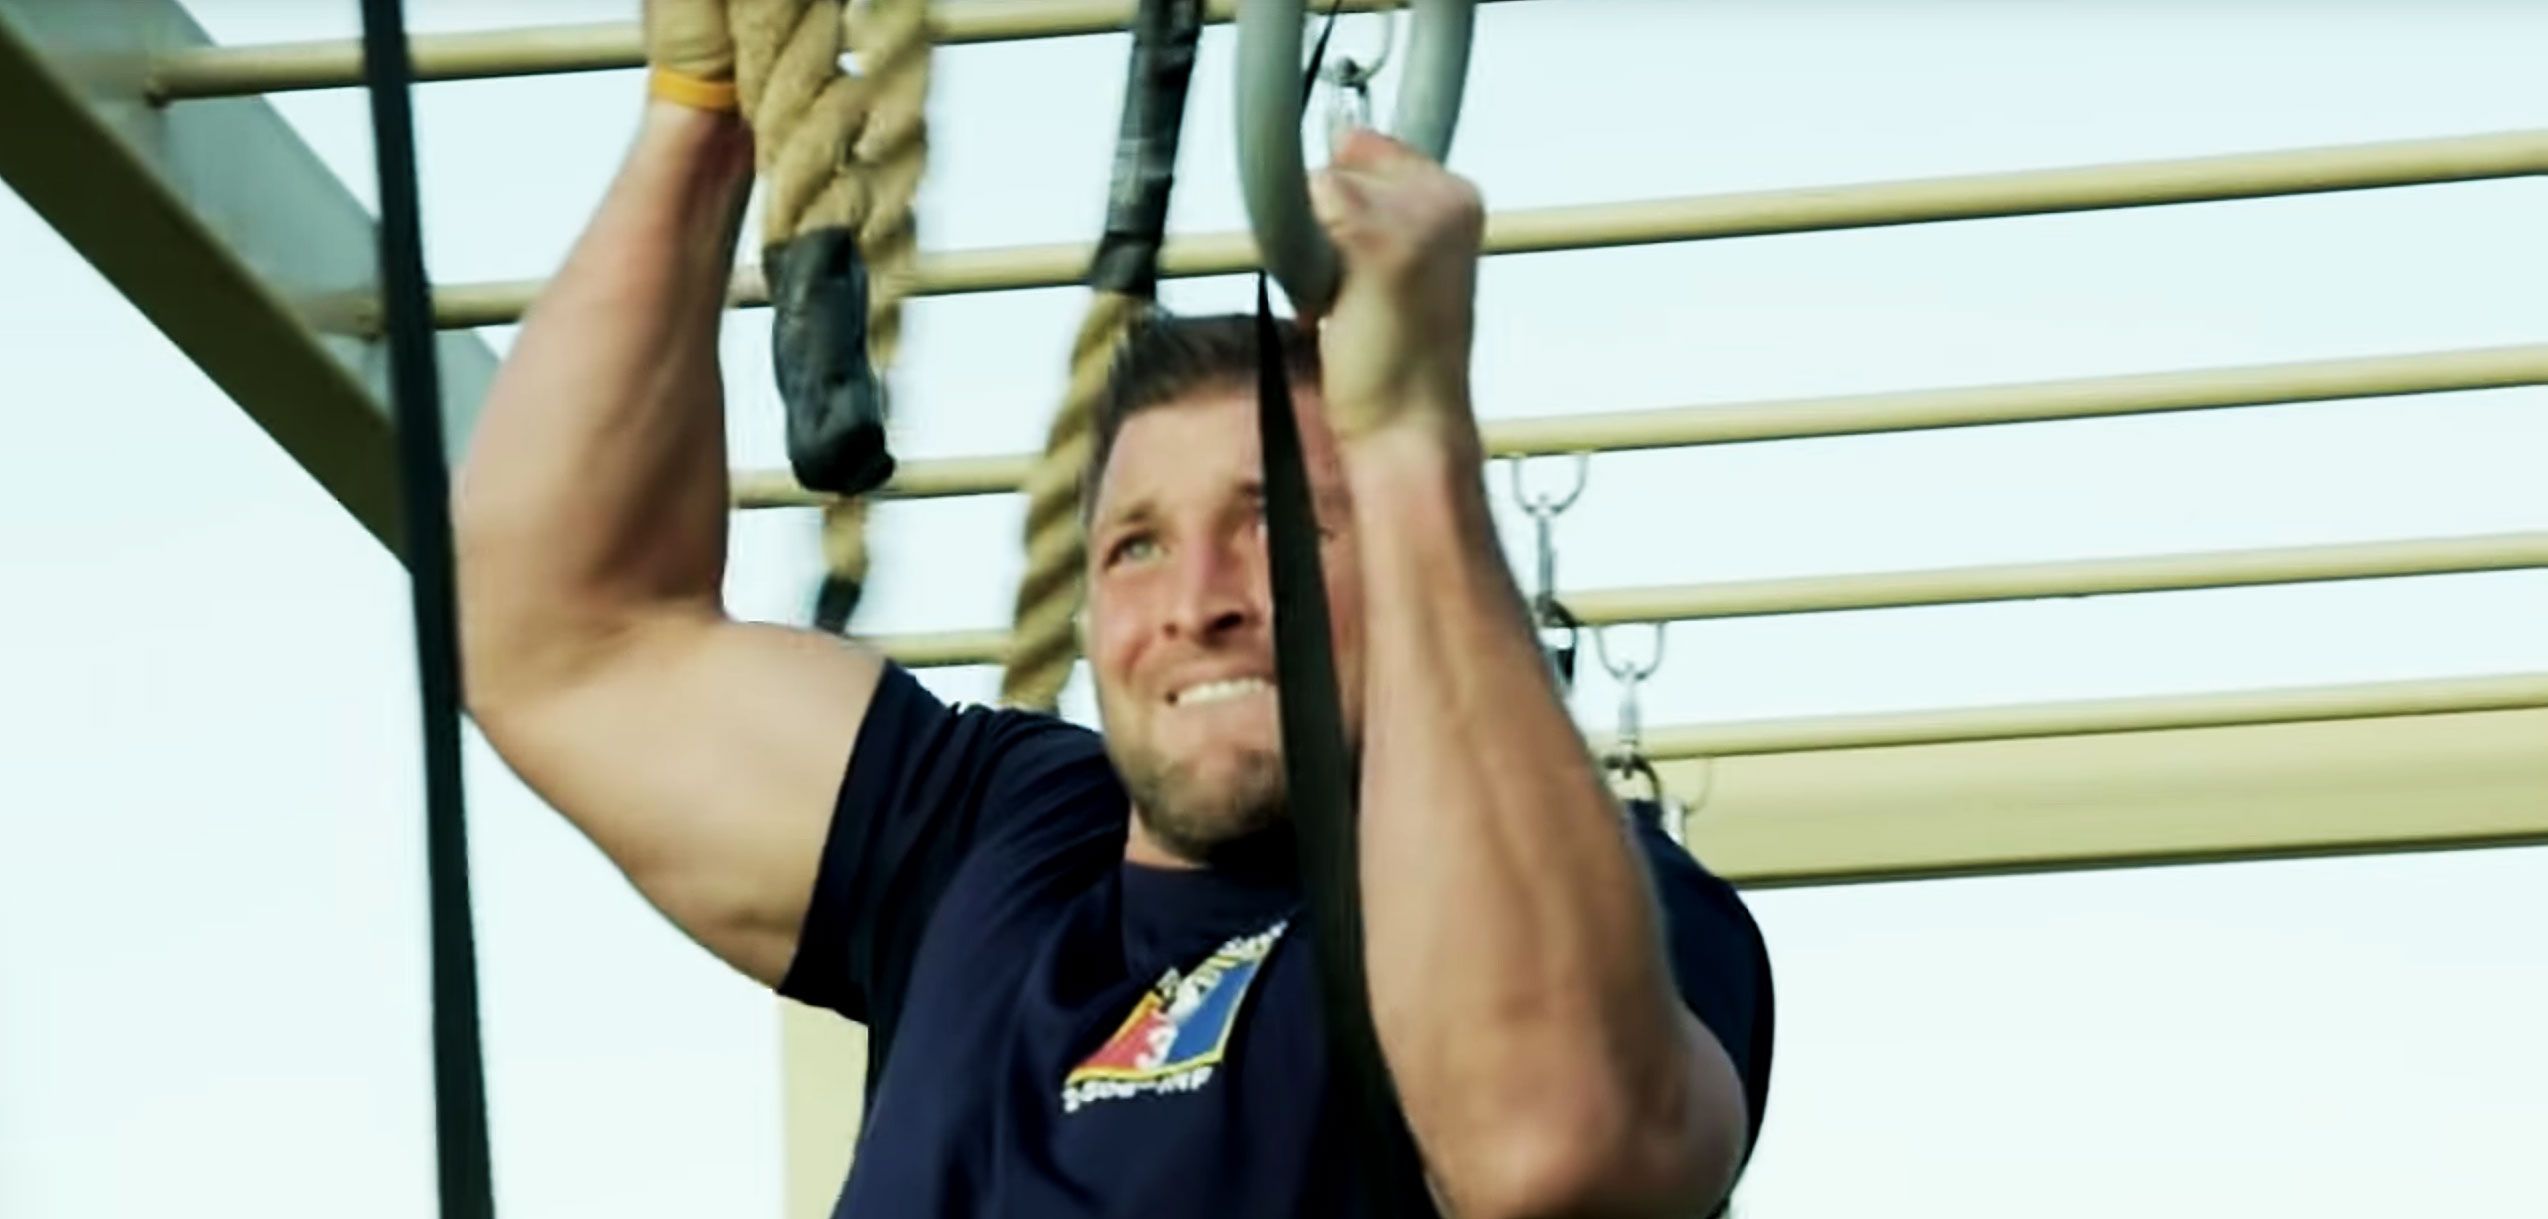 WTF is Tim Tebow doing in this gym video?